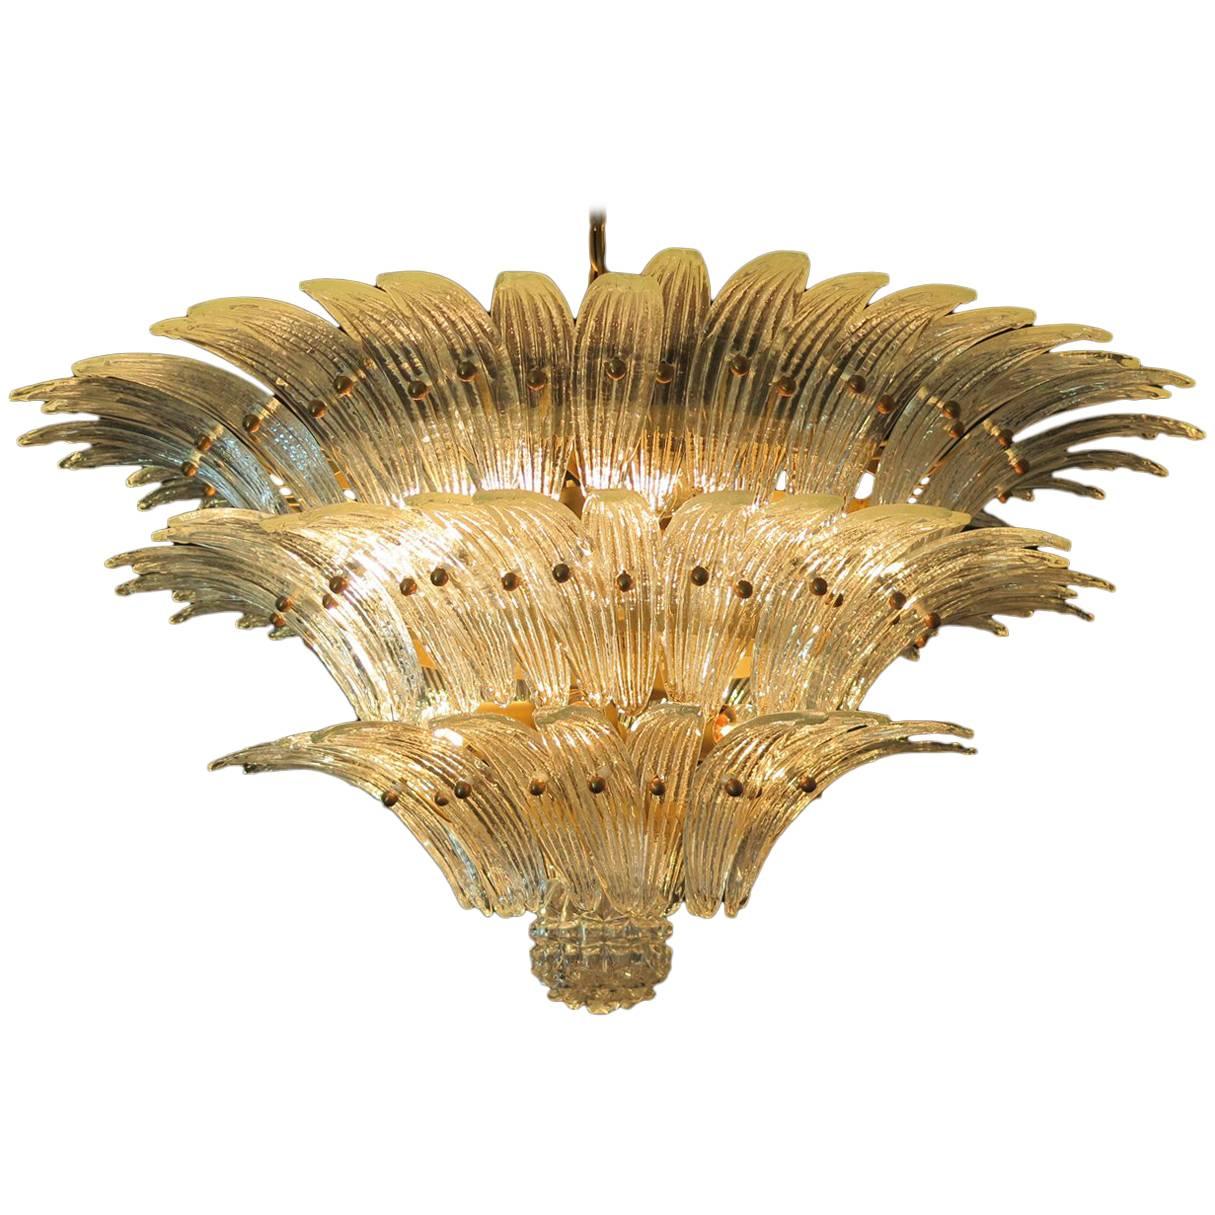 Palmette ceiling light made by Murano trasparent glasses in a gold metal frame. Murano blown glass in a traditional way. Structure in gold colored metal.
Period: 1980s
Dimensions: (85 cm) - height (115 cm) diameter;
Dimension glasses: 10.25 inches